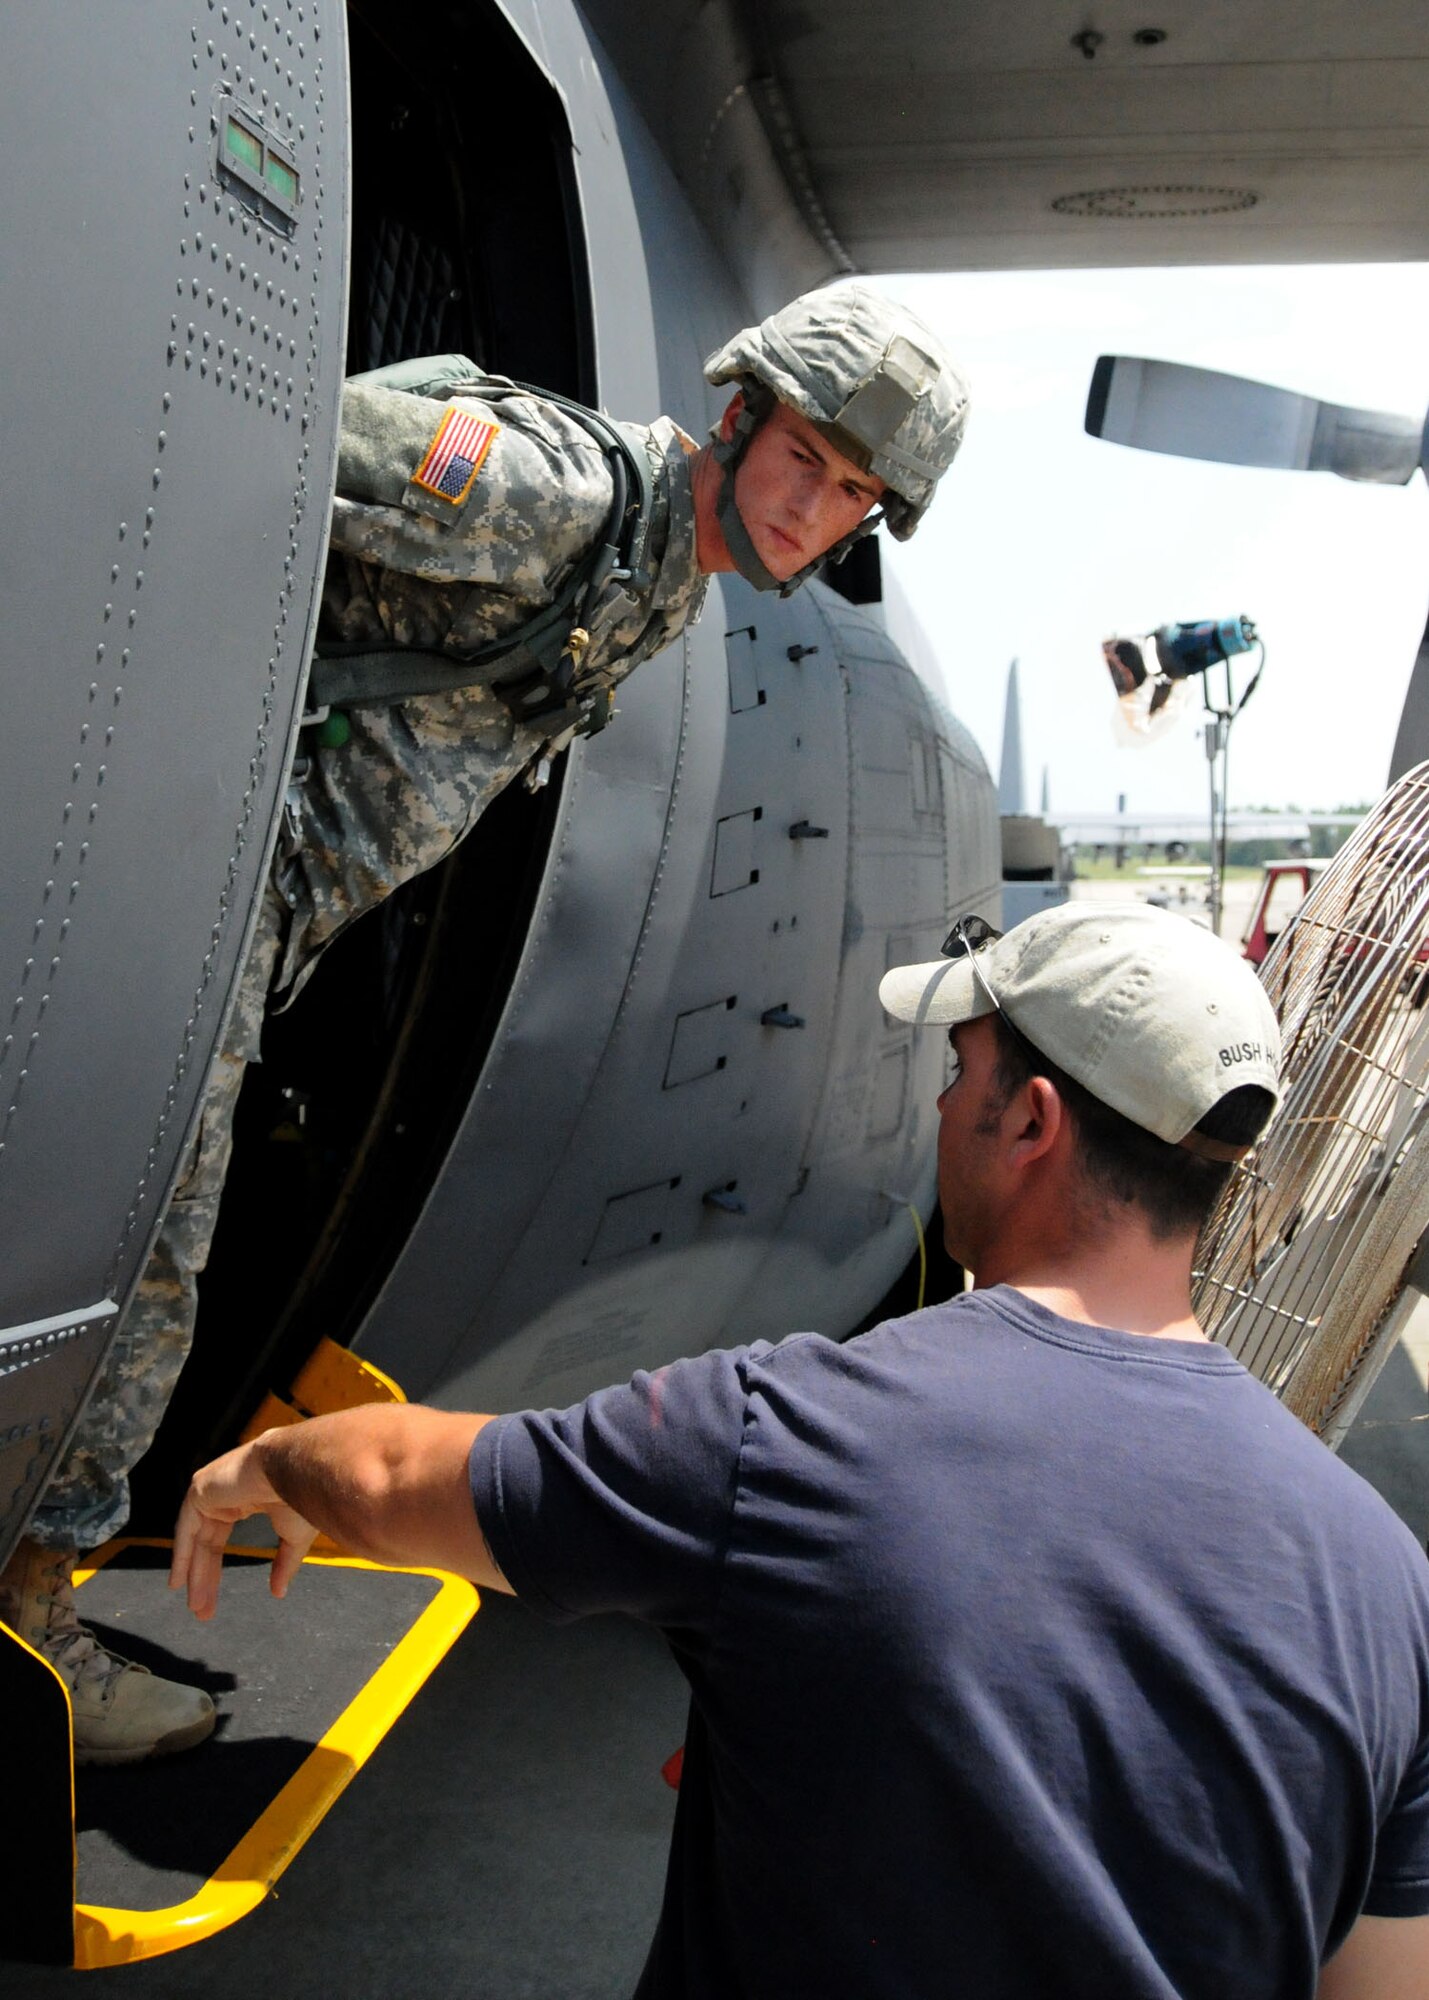 Army Pvt. William Lourash, a student awaiting training at the U.S. Army Airborne School, receives instruction from Staff Sgt. Nick Niday, an Airborne school course manager, during a simulated jump on the flight line at Duke Field, Fla., June 14. The production company, WILL Interactive, started work on a choose-your-own-adventure film for Department of Defense jumpmaster training at Fort Benning, Ga., with help from members from the U.S. Army Airborne School. However, when the crew needed a C-130 in portions of the video, the 919th Special Operations Wing offered to support the project at Duke Field June 13-15. (U.S. Air Force photo/Tech. Sgt. Cheryl Foster)